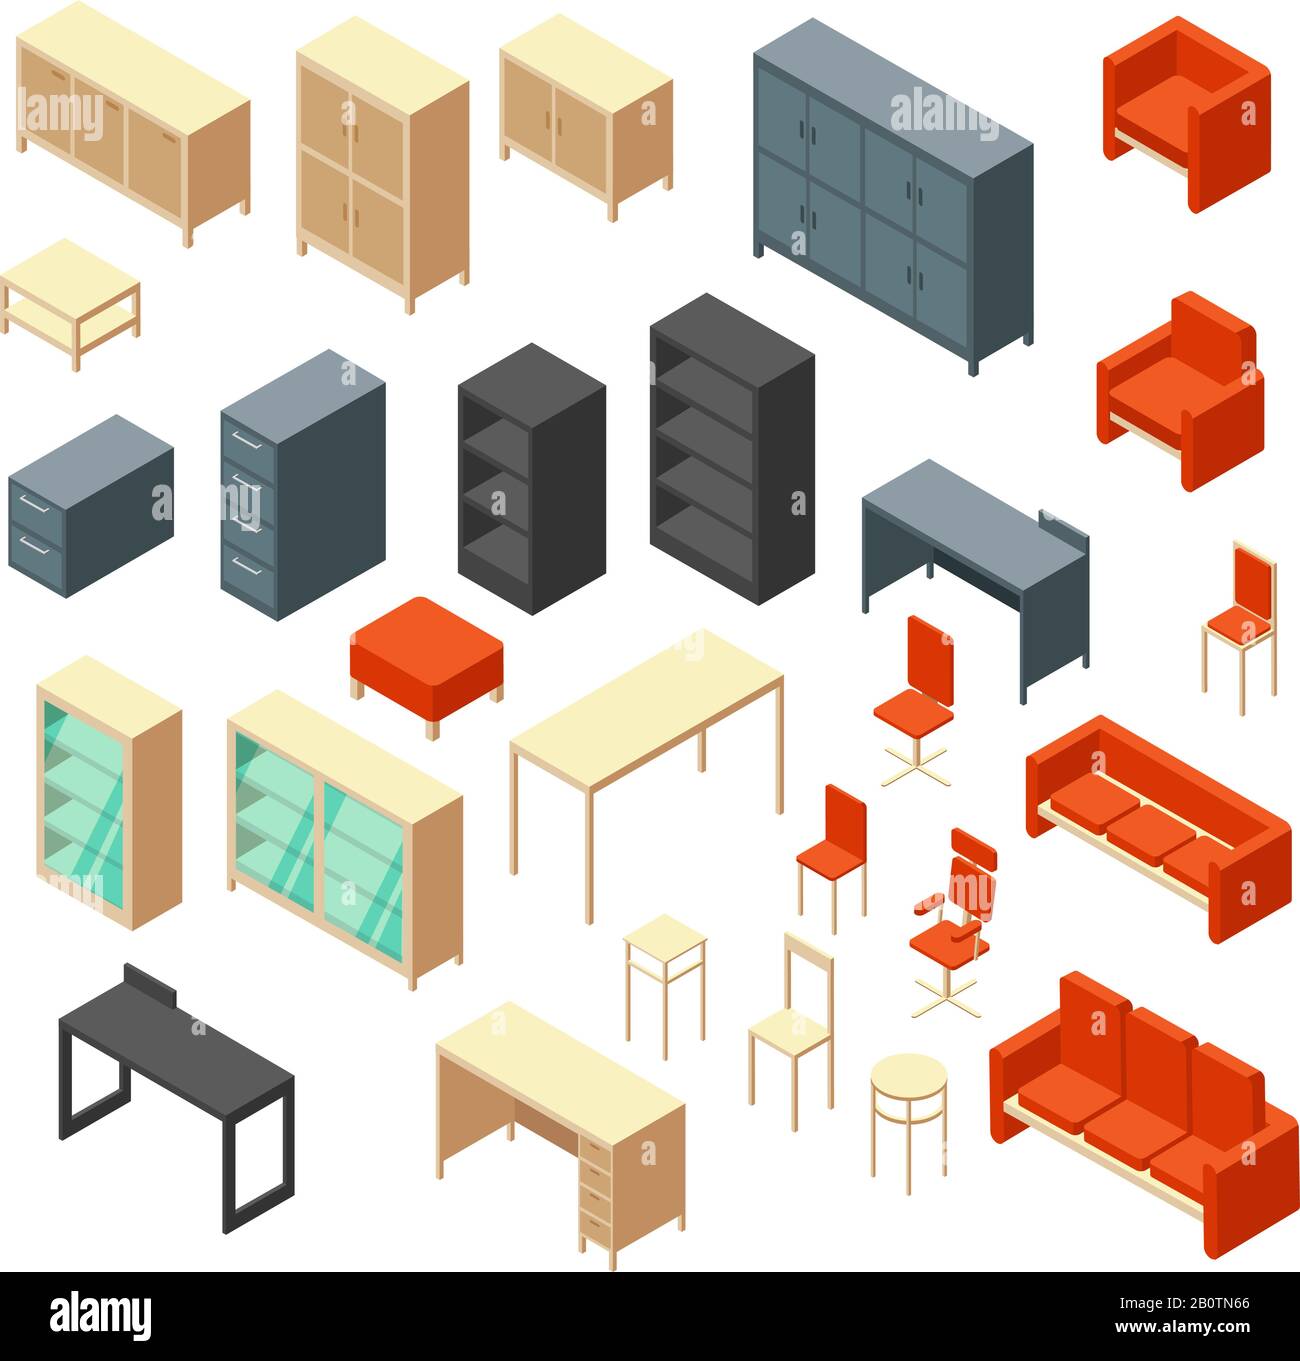 Isometric 3d office furniture isolated. Interior elements vector set. Furniture for interior room office, table and armchair illustration Stock Vector